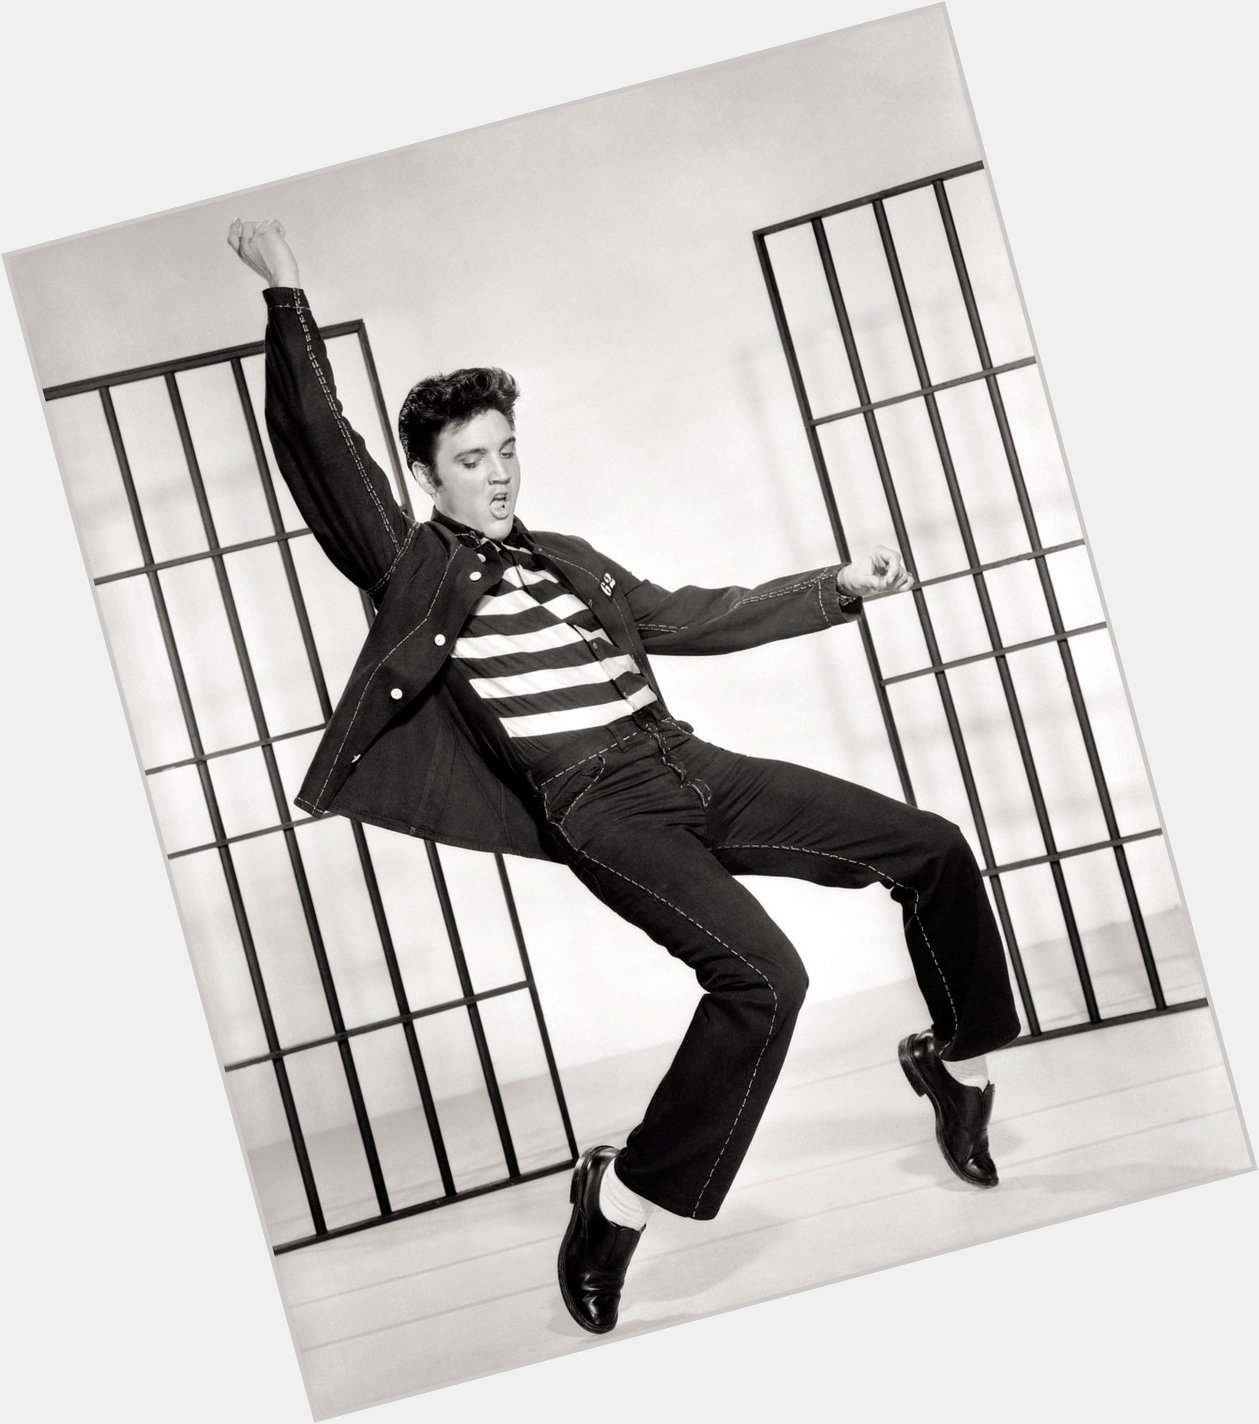 Happy birthday to the late Elvis Presley, who would have turned 88 today. 